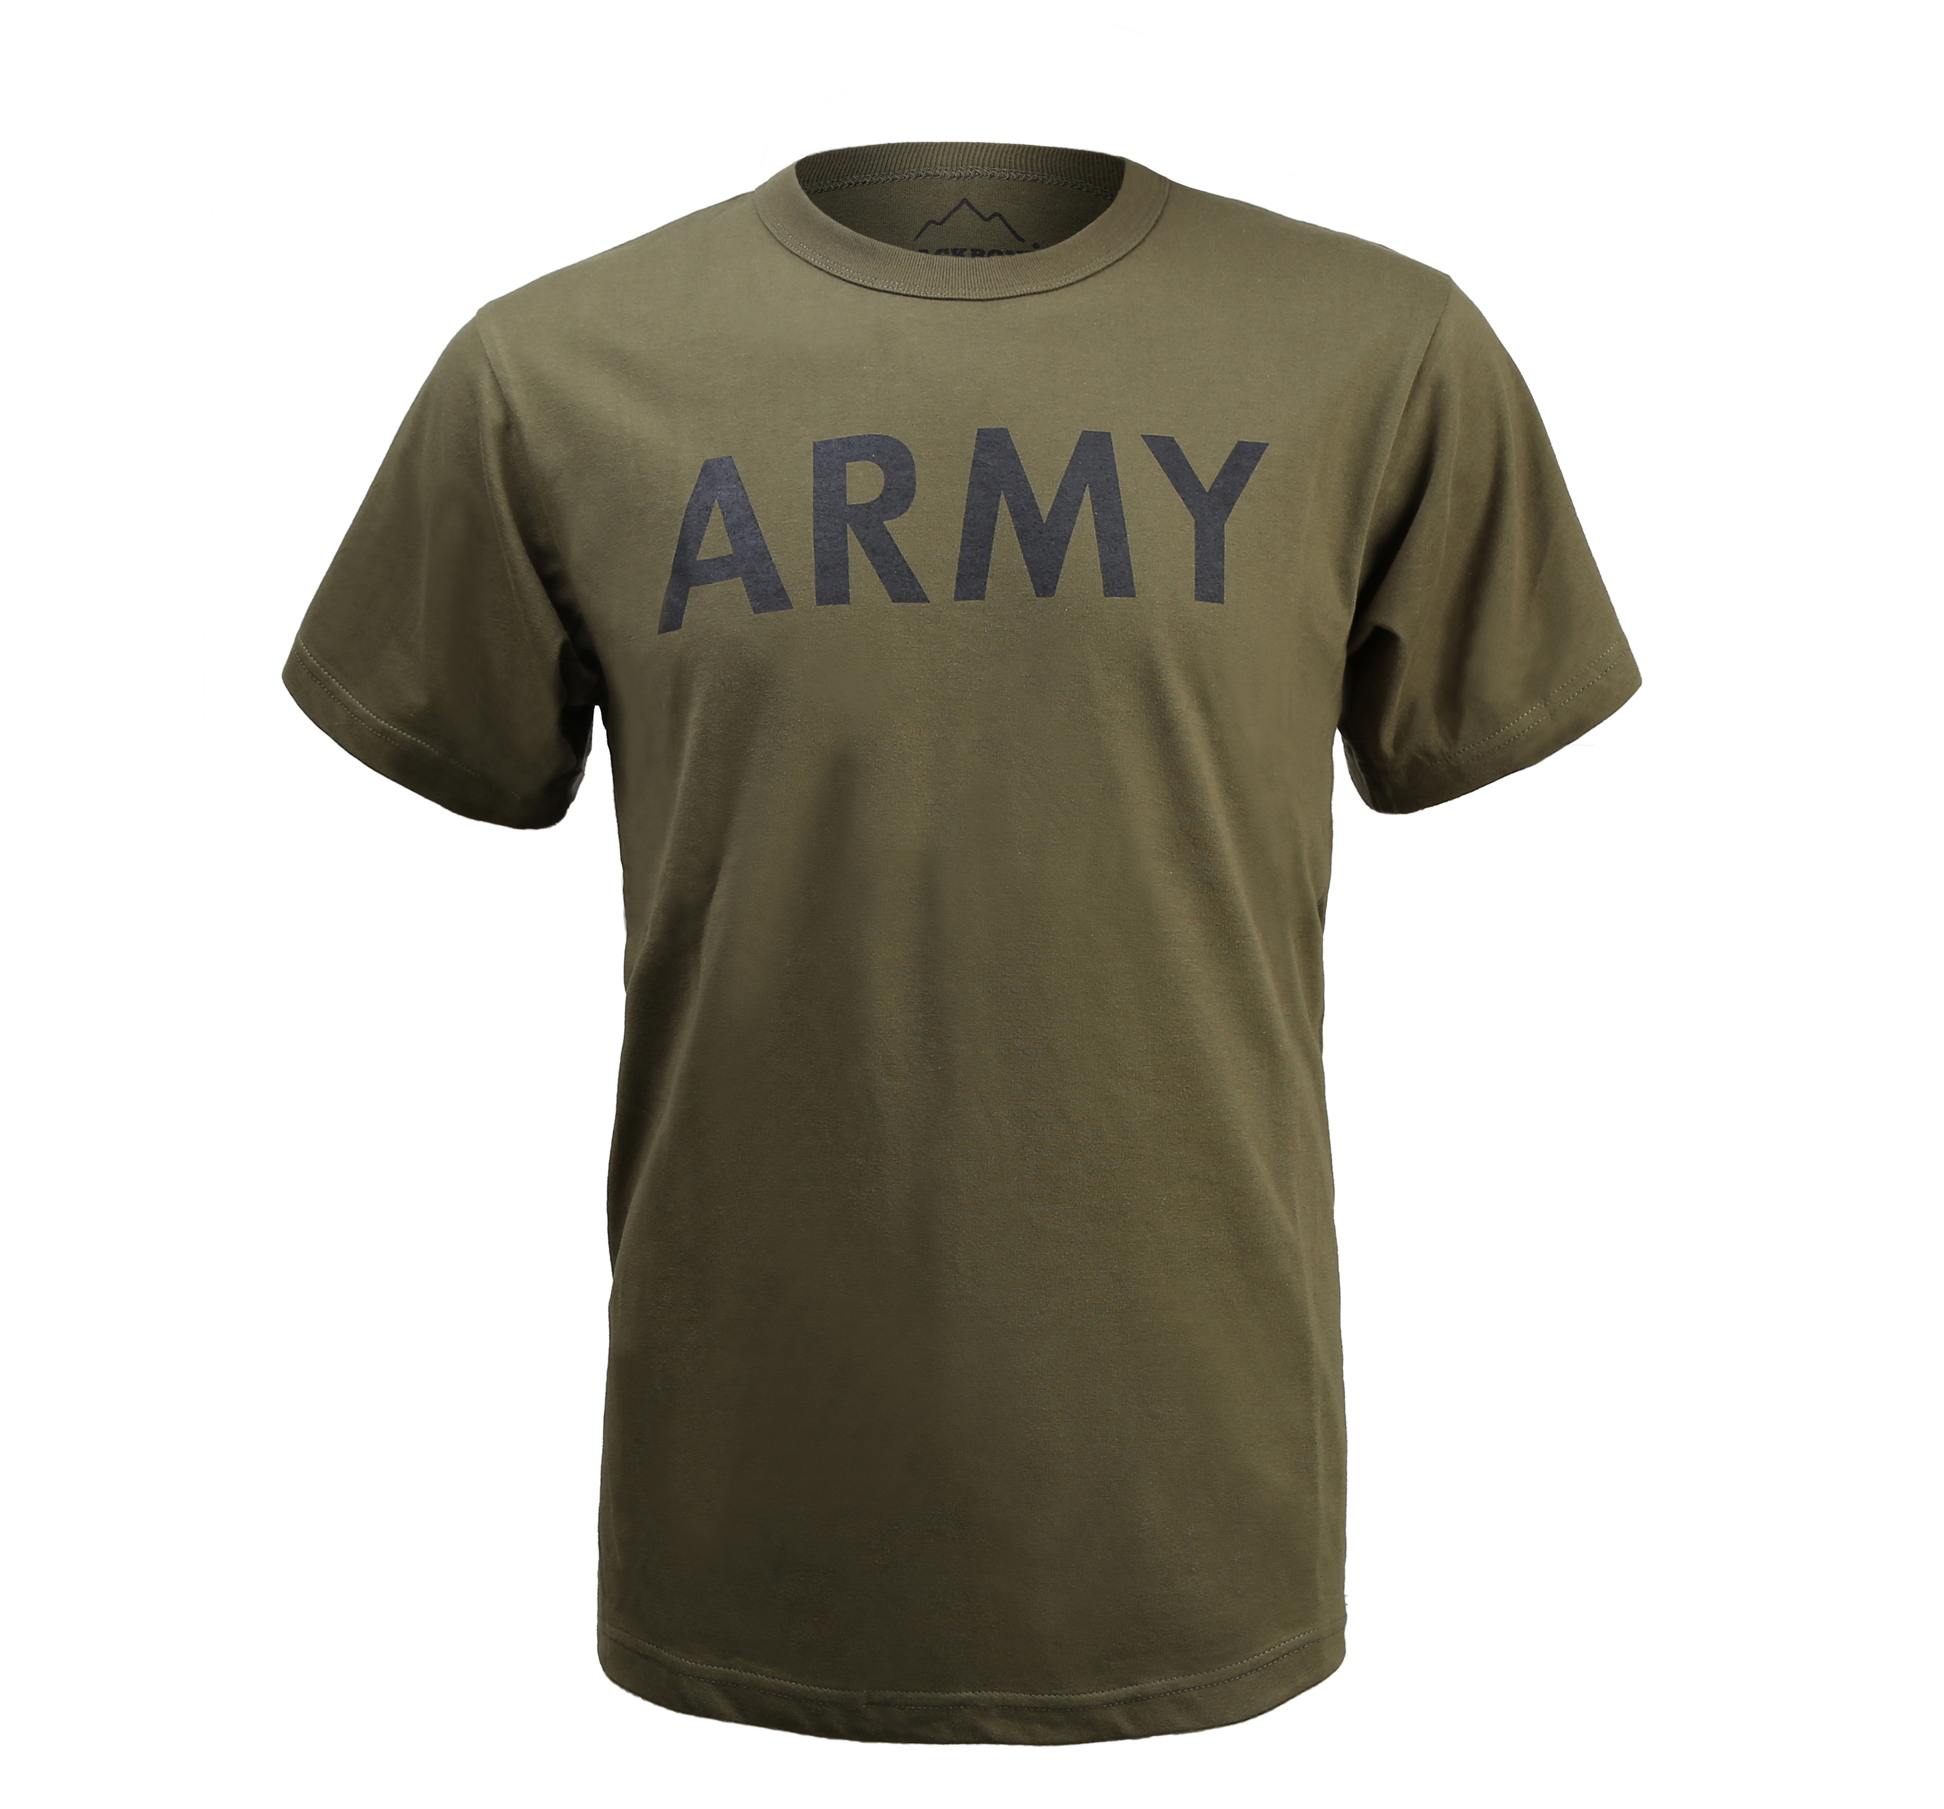 Mens Army Military Outdoor Gym Training Boot Camp Running T-shirt Tee ...